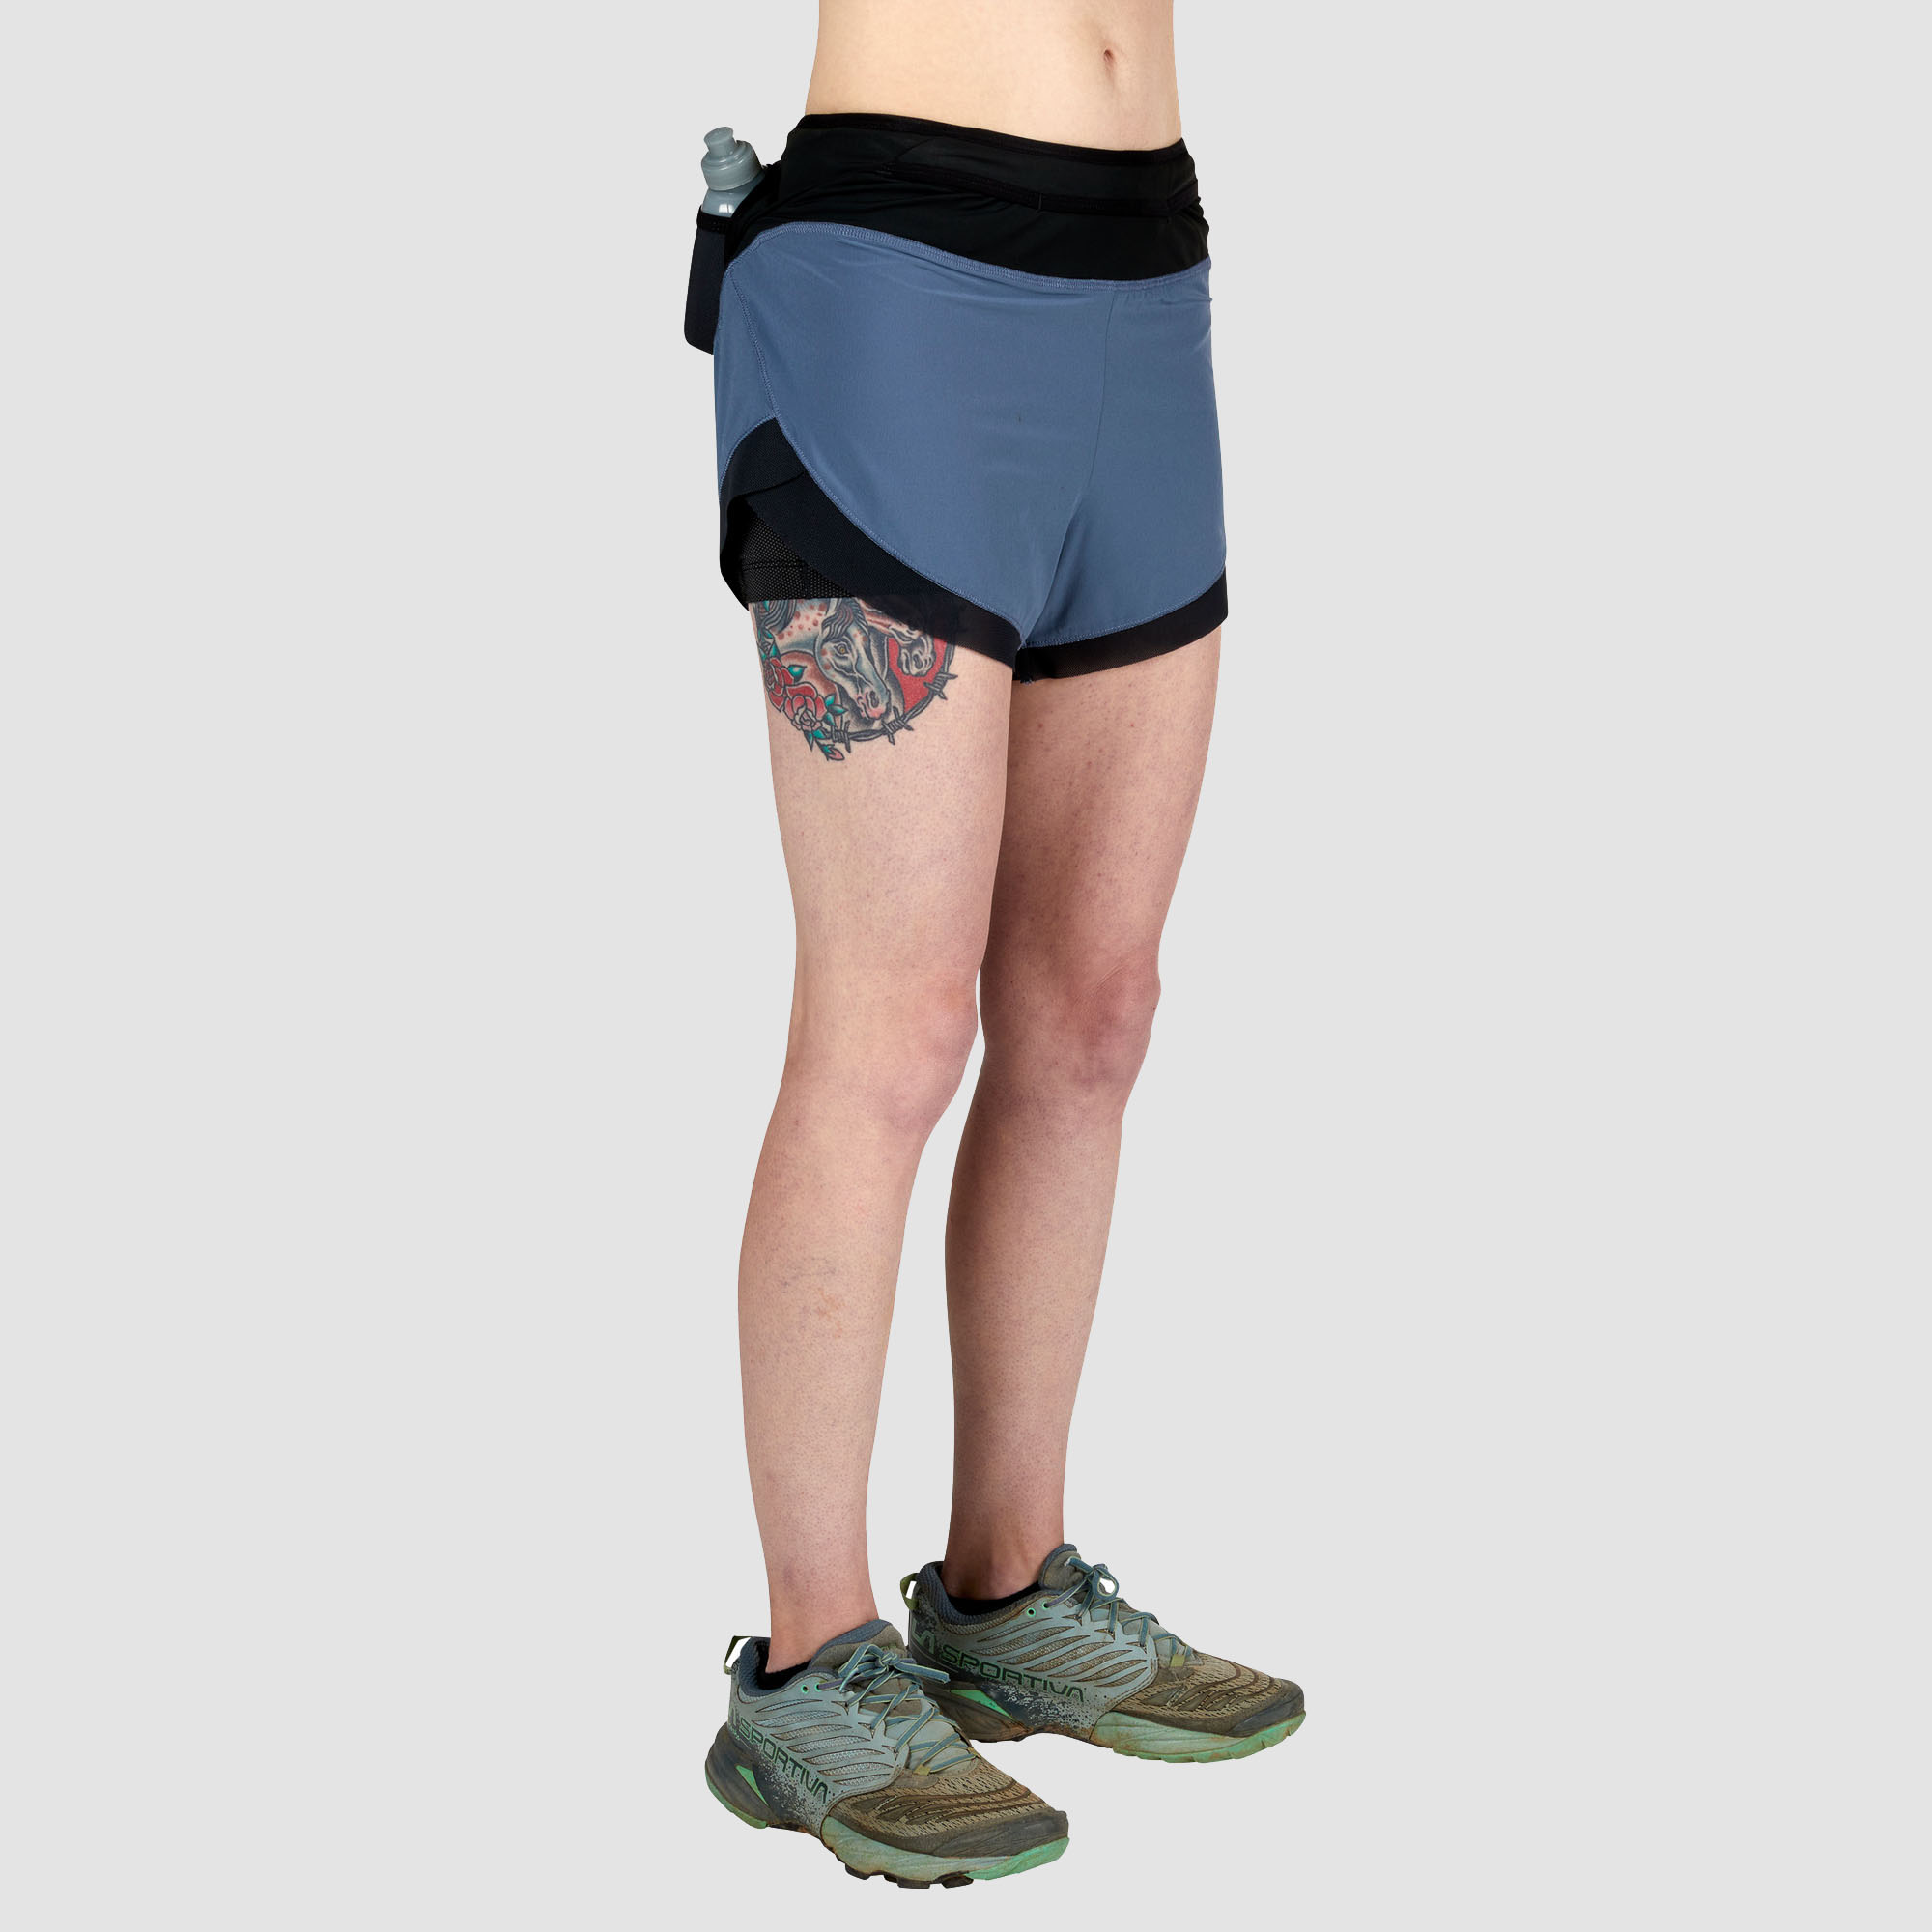 Ultimate Direction Women's Hydro Short - Prior Year Waistbelt Size XS